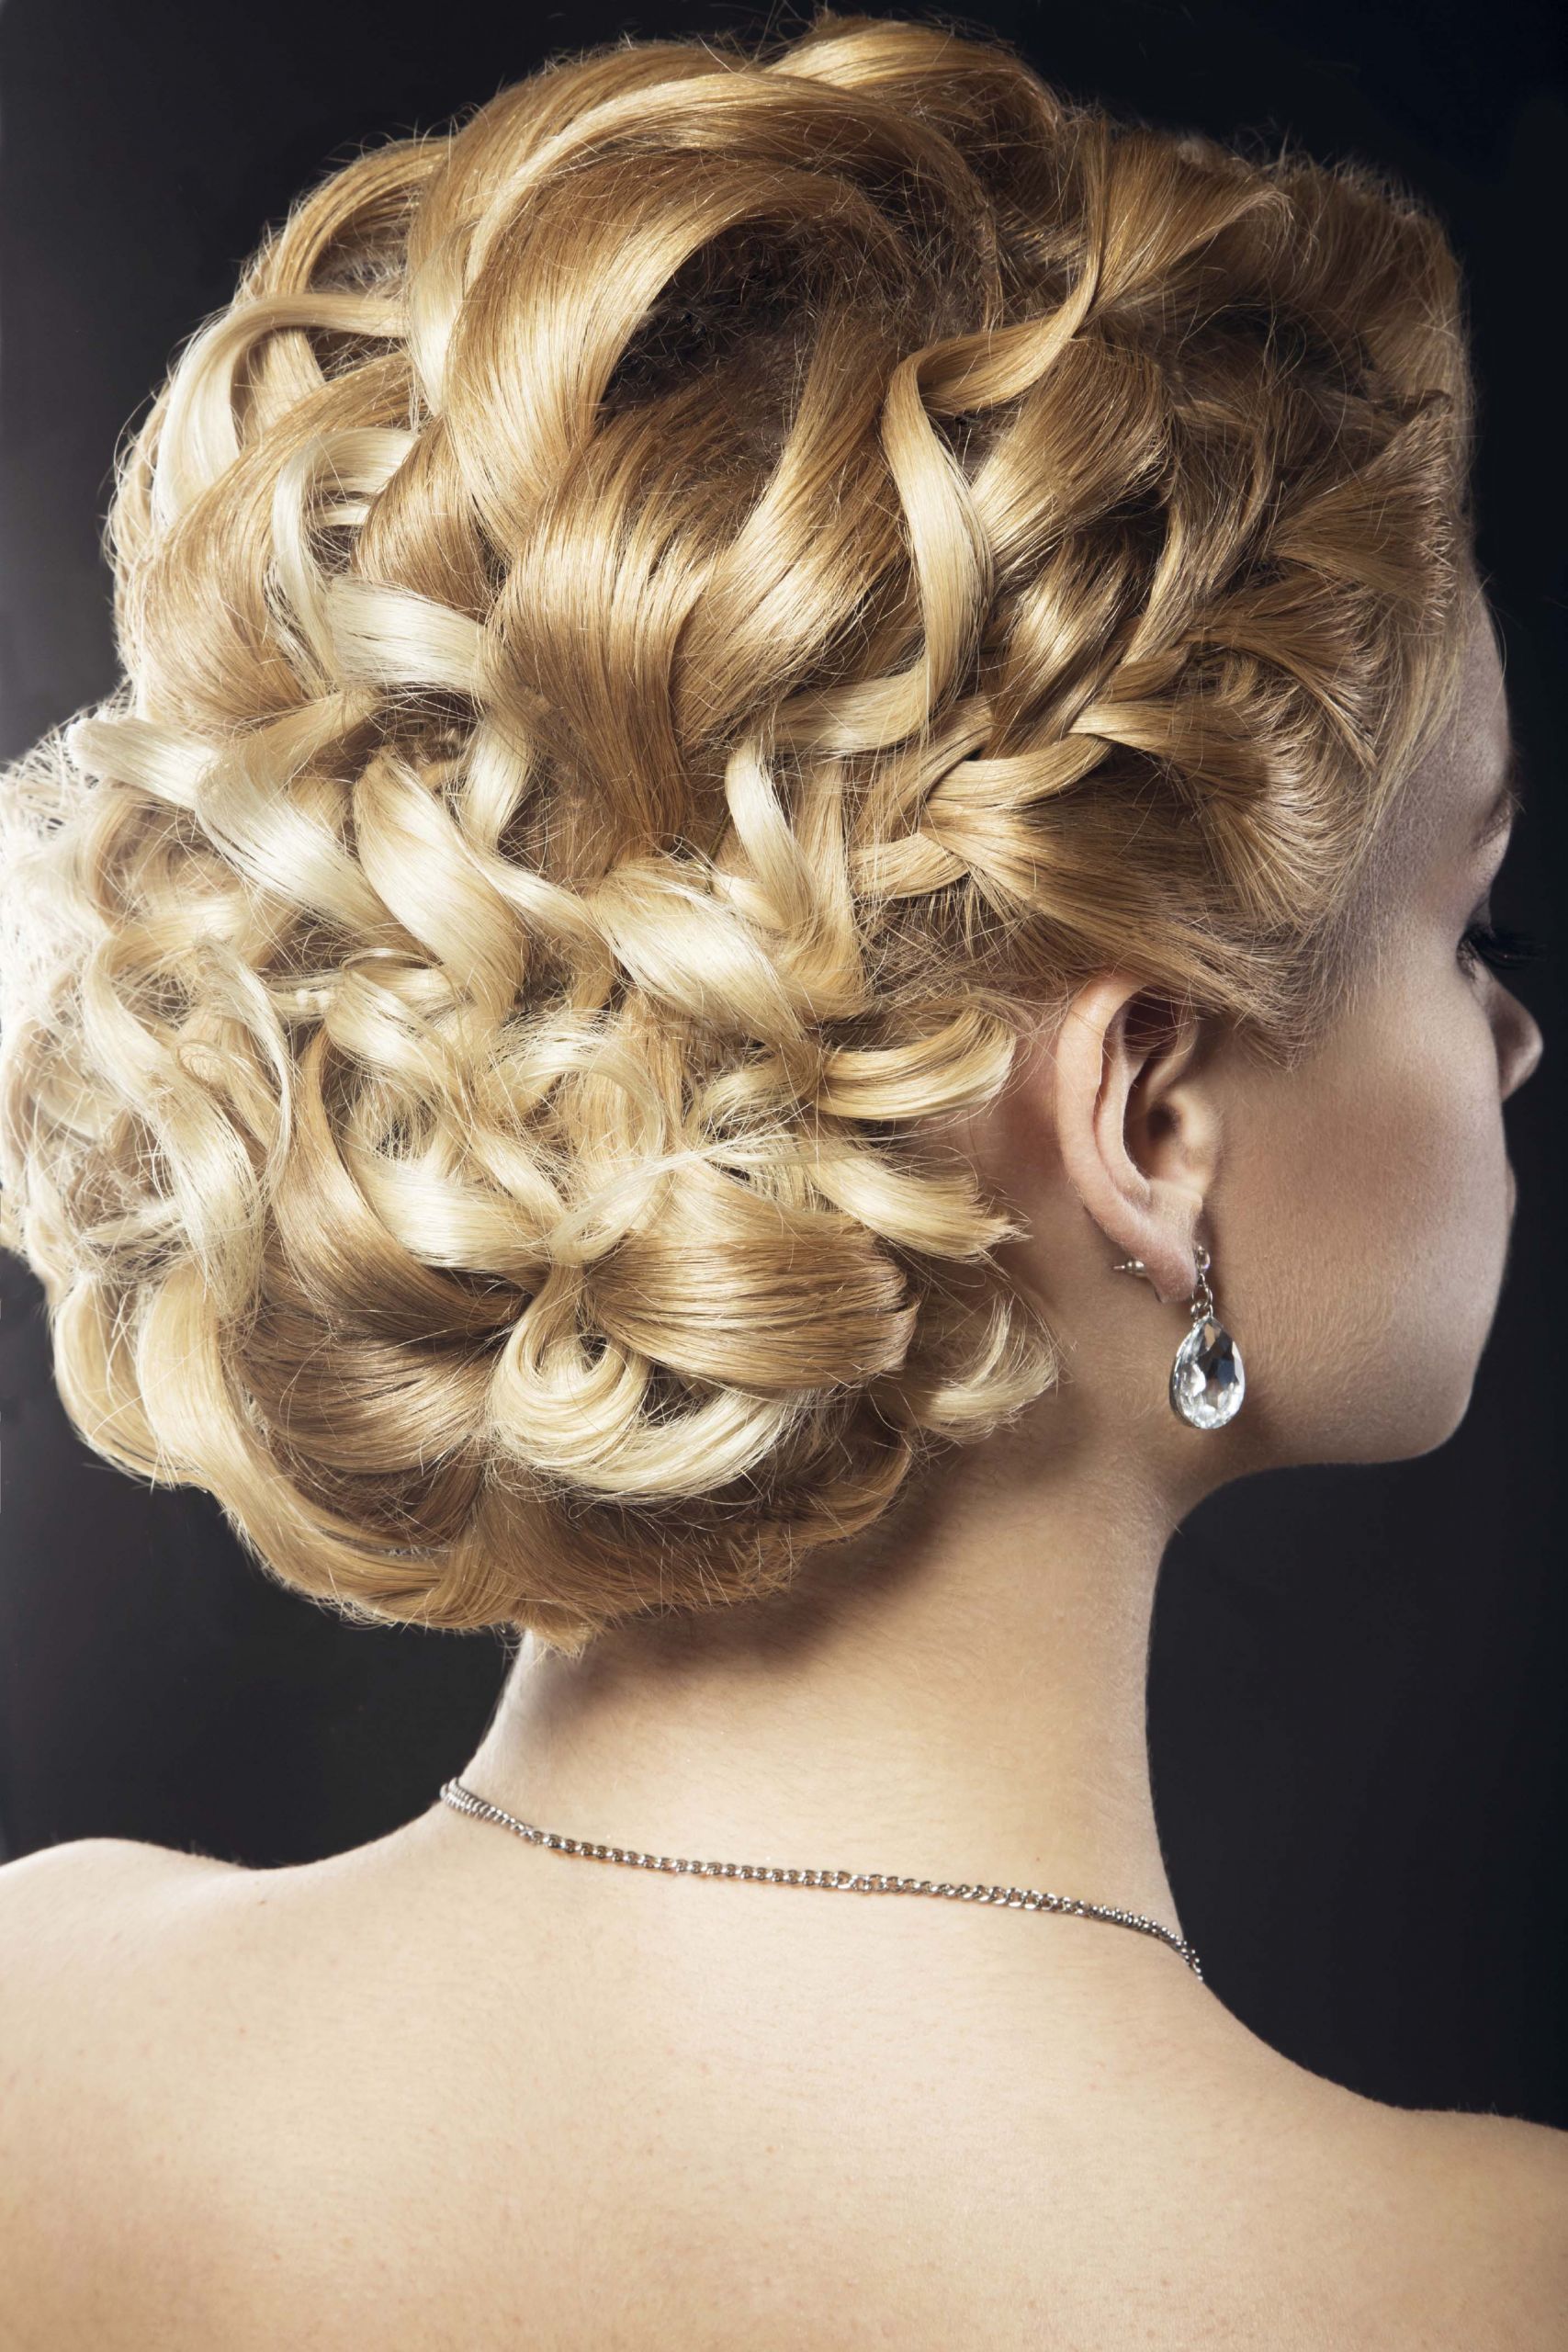 Updo Hairstyles For Curly Hair
 9 Spring Wedding Updos for Curly Hair